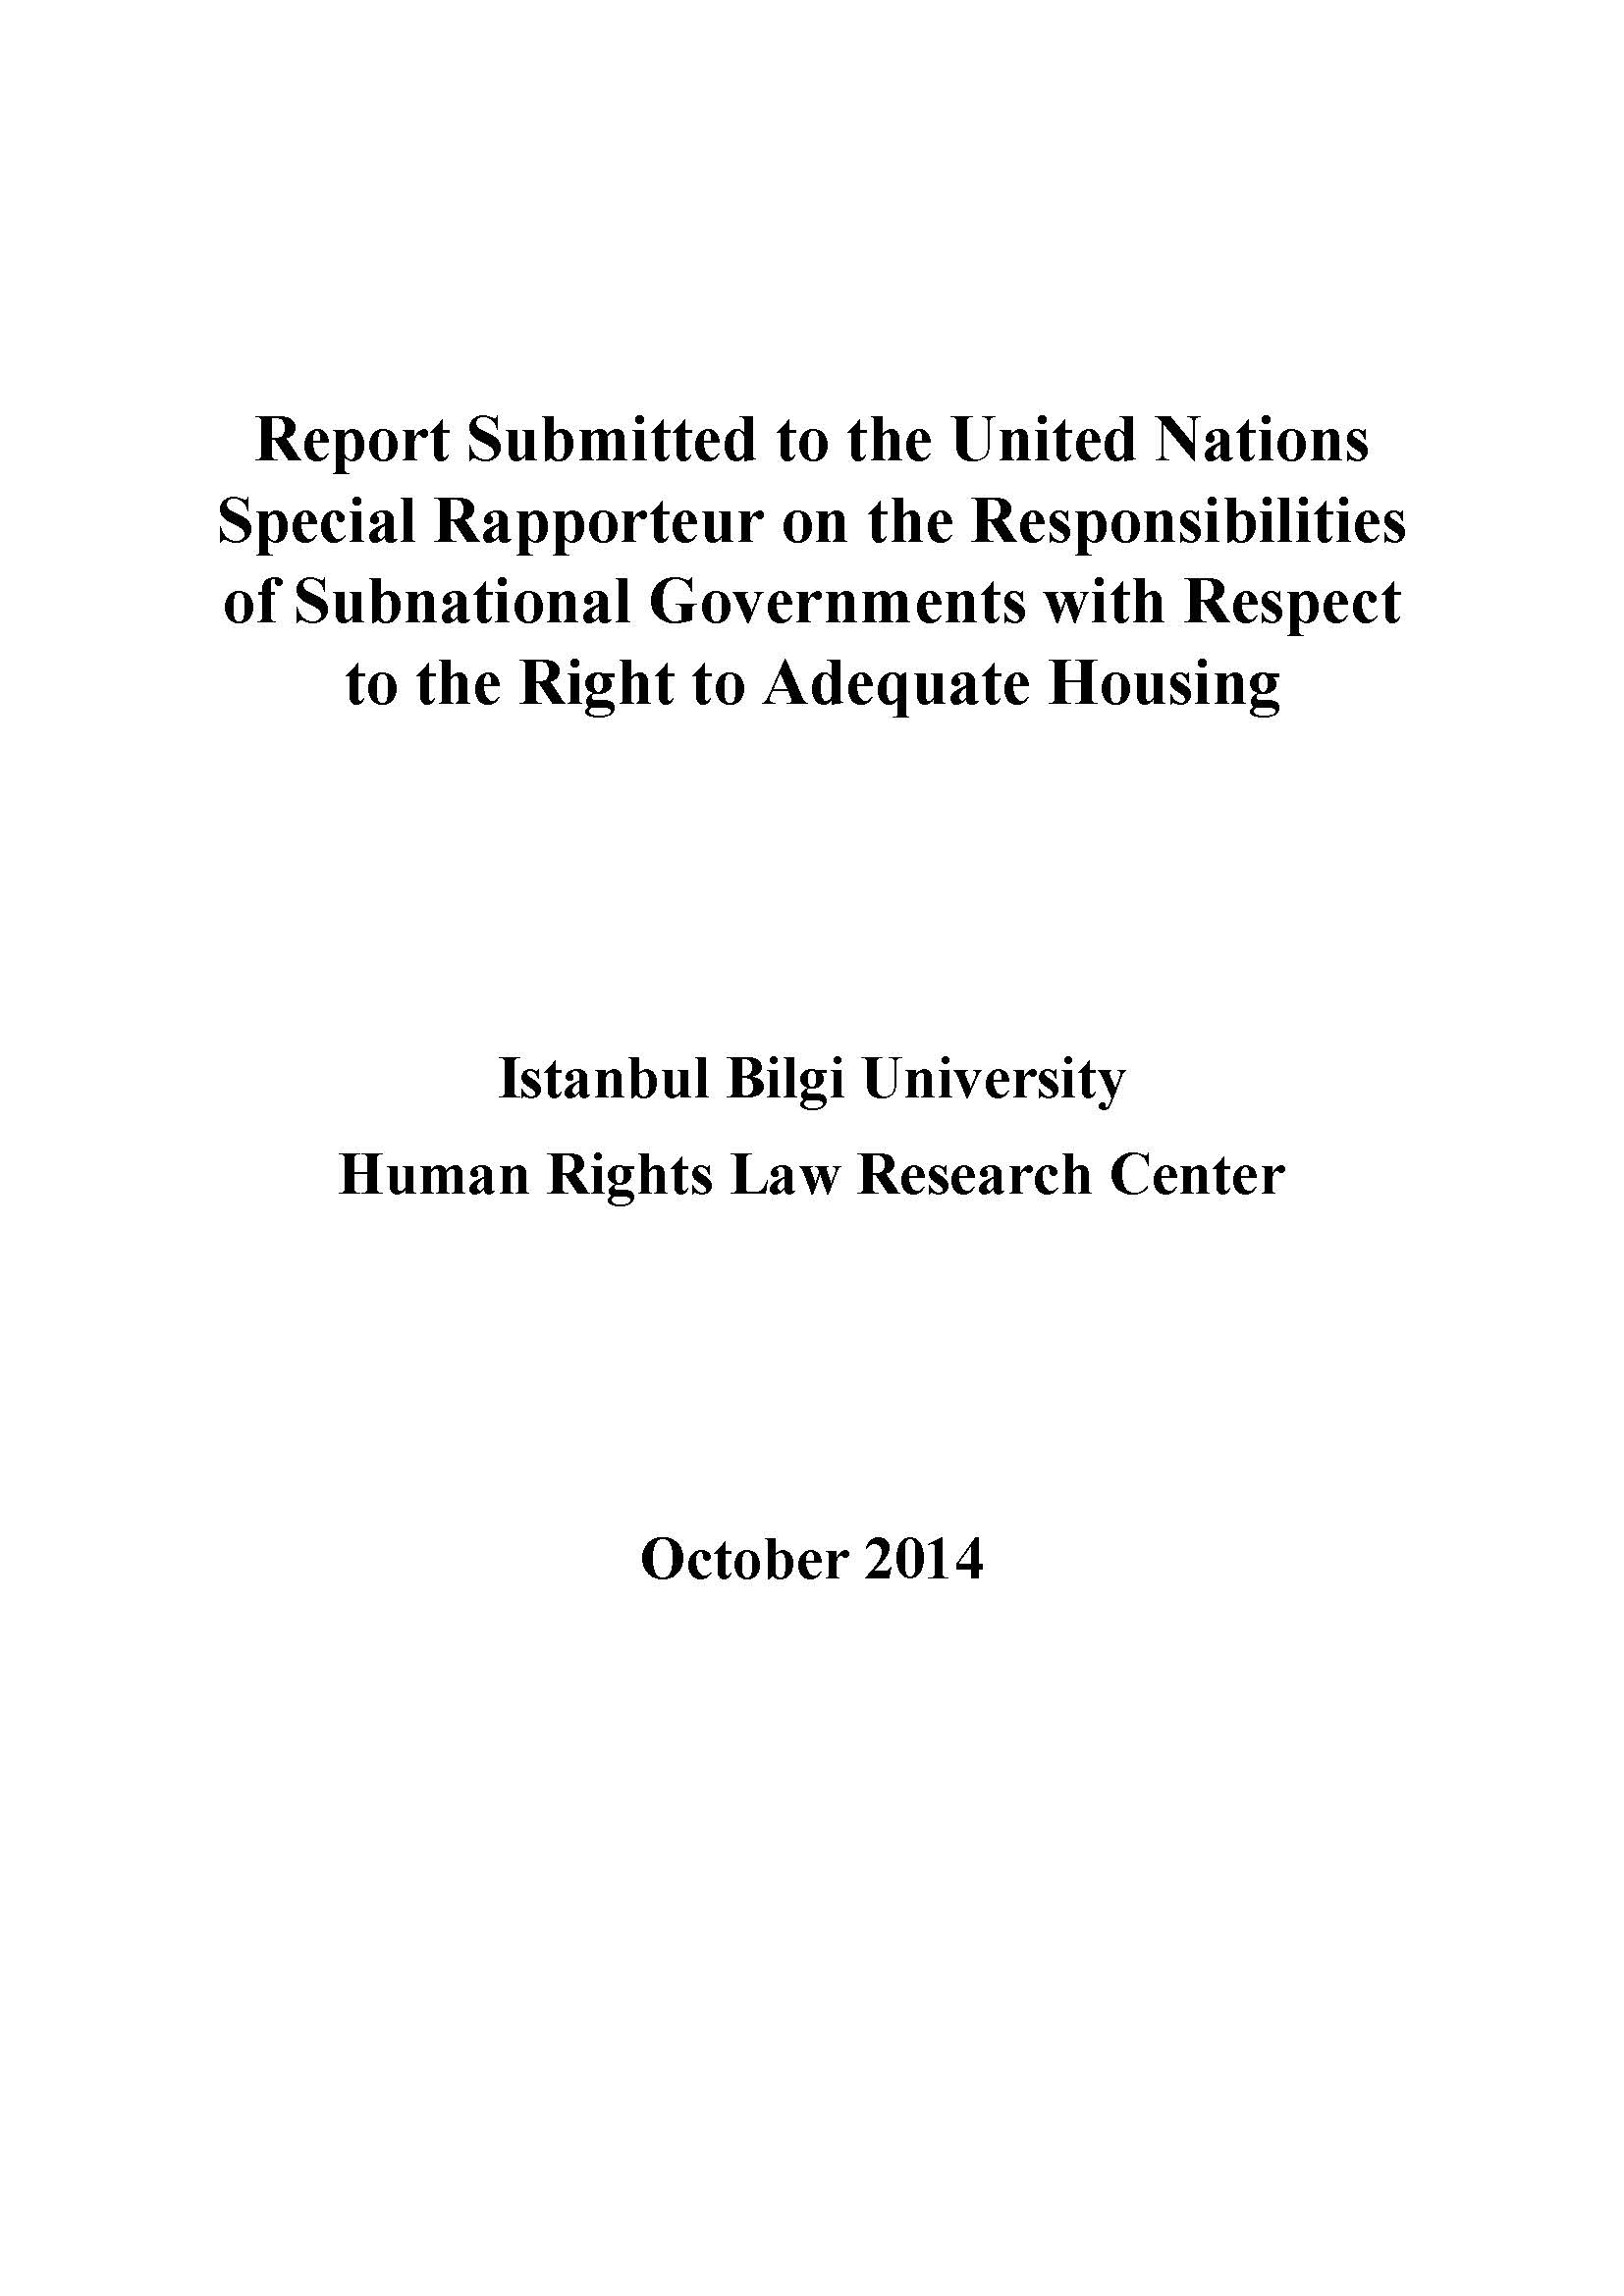 Responsibilities of Subnational Governments with Respect to the Right to Adequate Housing